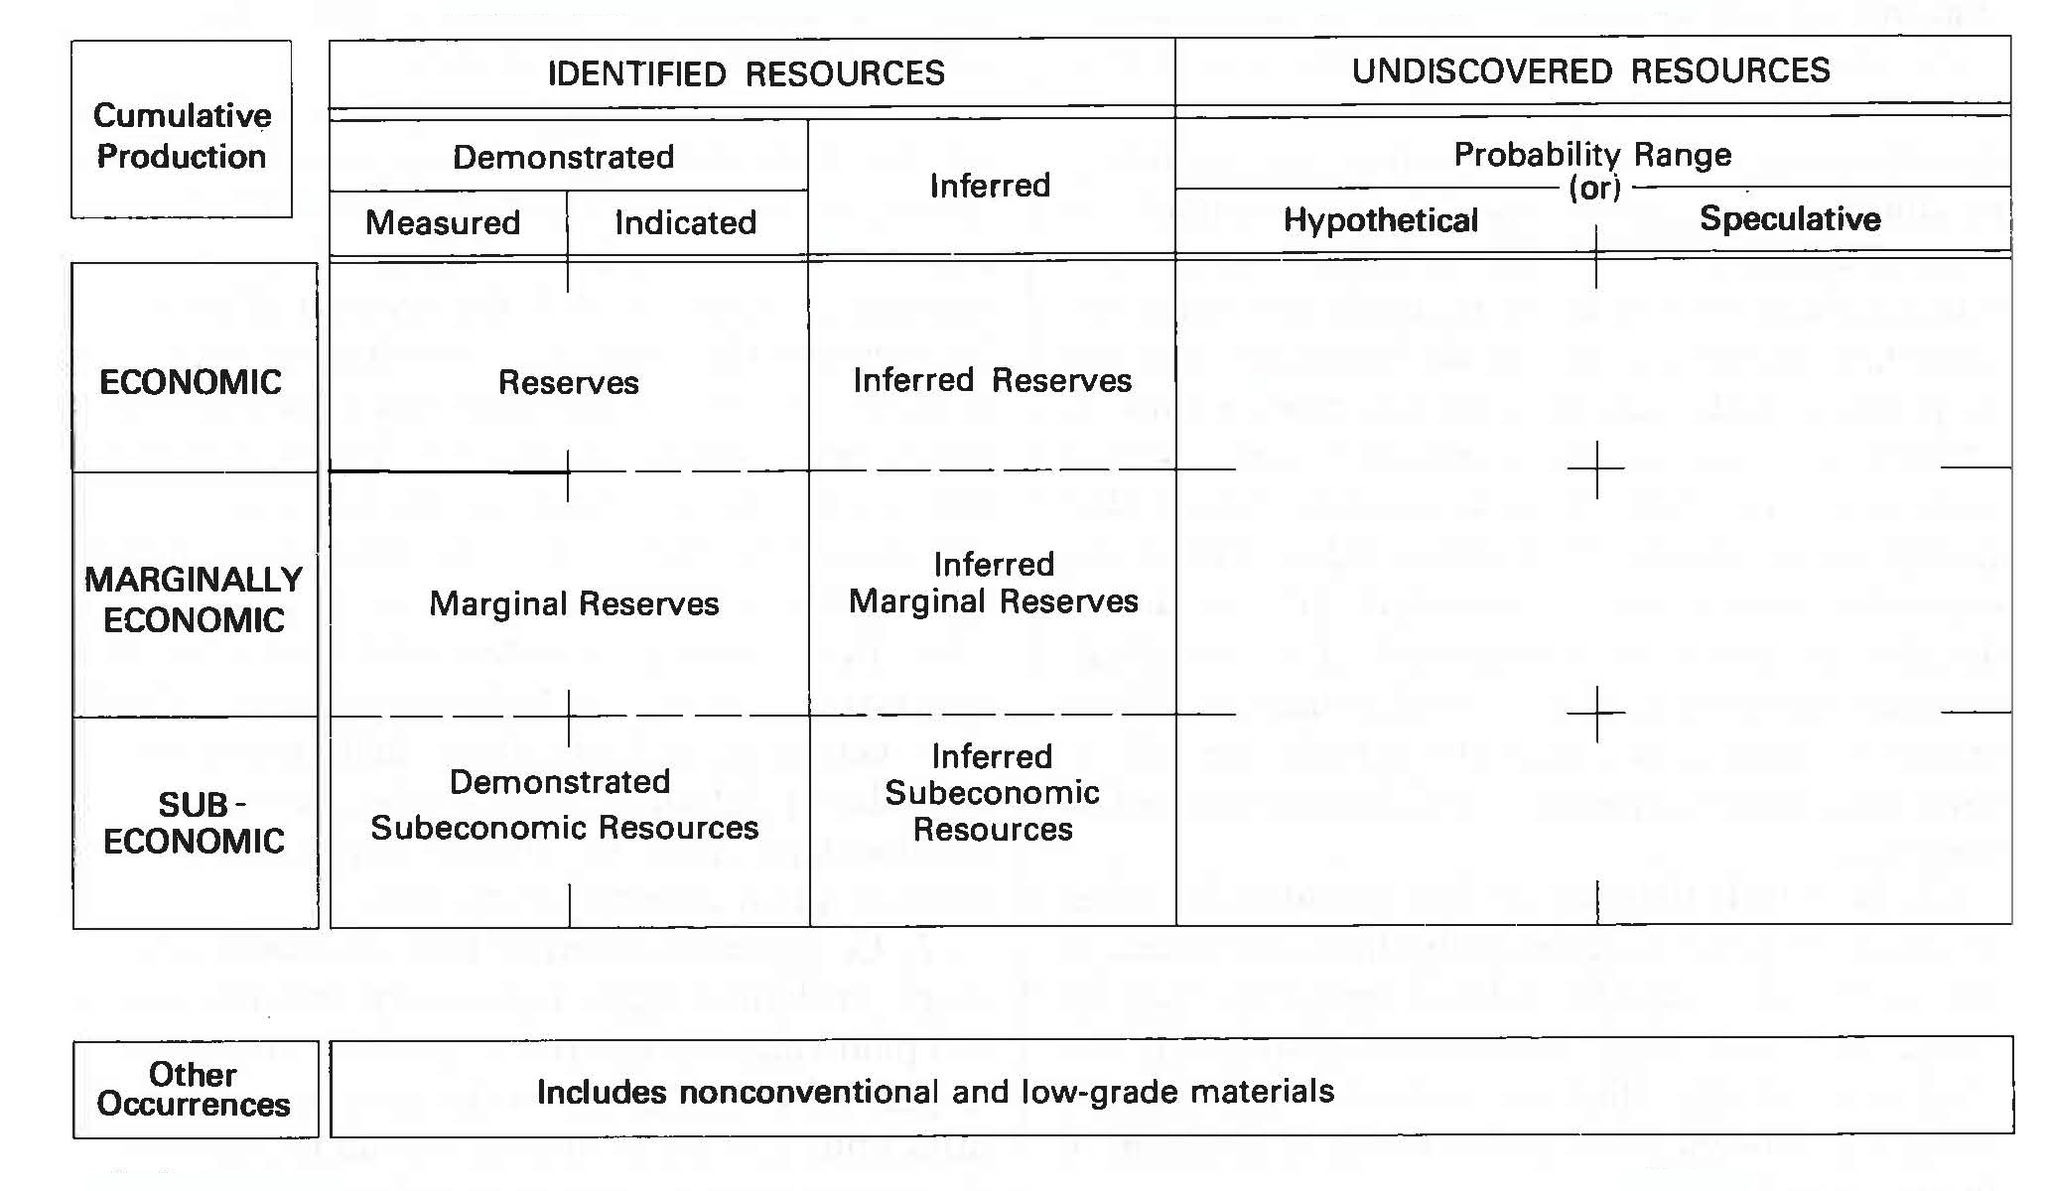 The chart shows reserves vs. resources